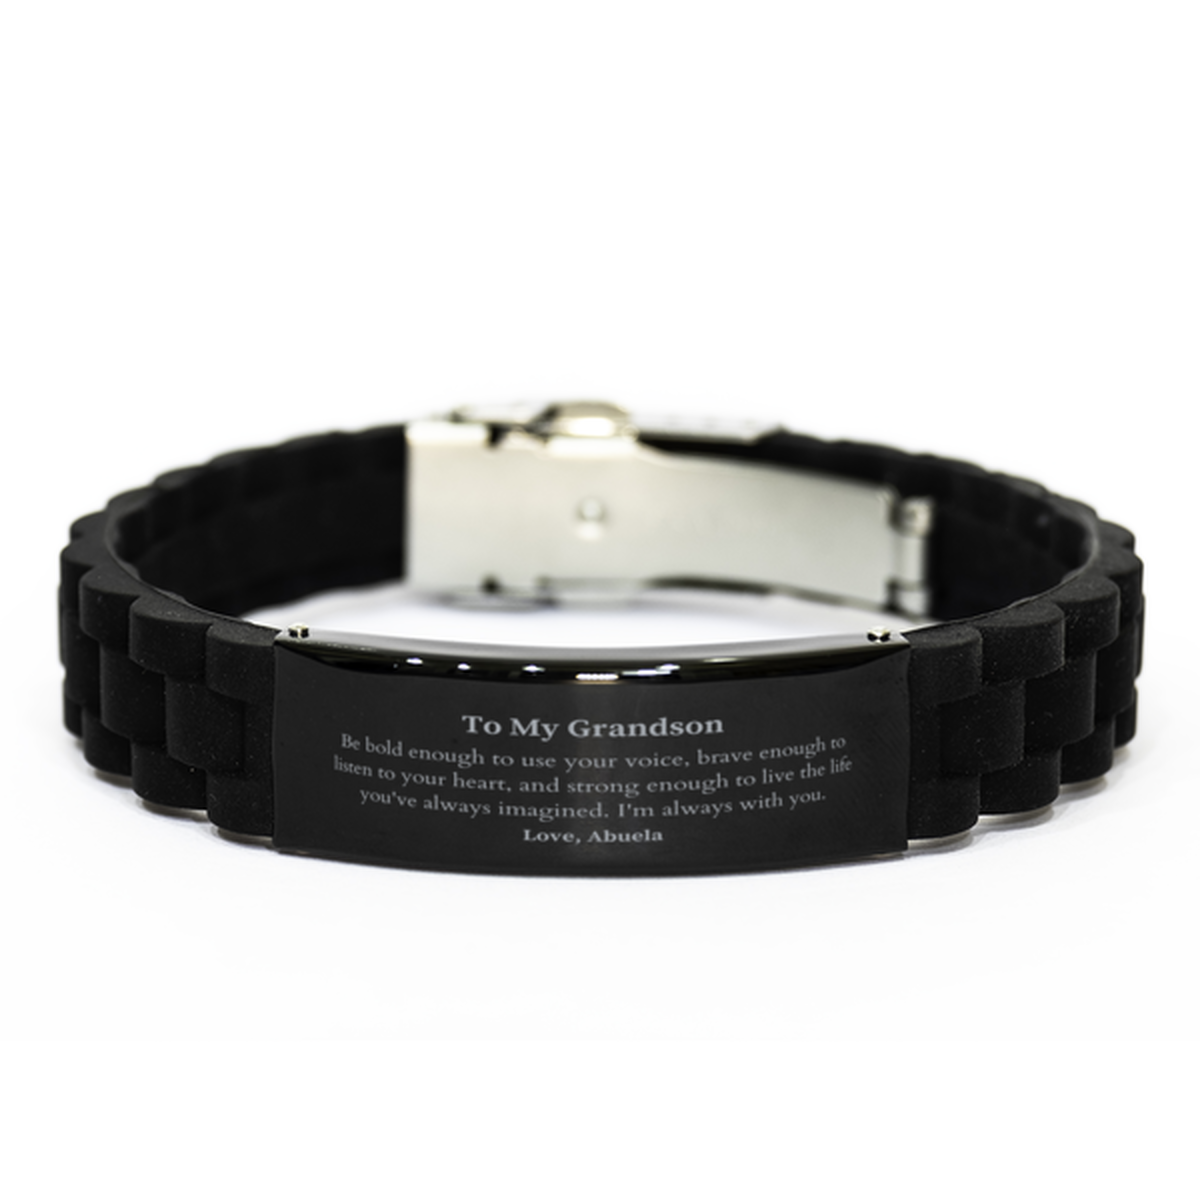 Keepsake Grandson Black Glidelock Clasp Bracelet Gift Idea Graduation Christmas Birthday Grandson from Abuela, Grandson Be bold enough to use your voice, brave enough to listen to your heart. Love, Abuela